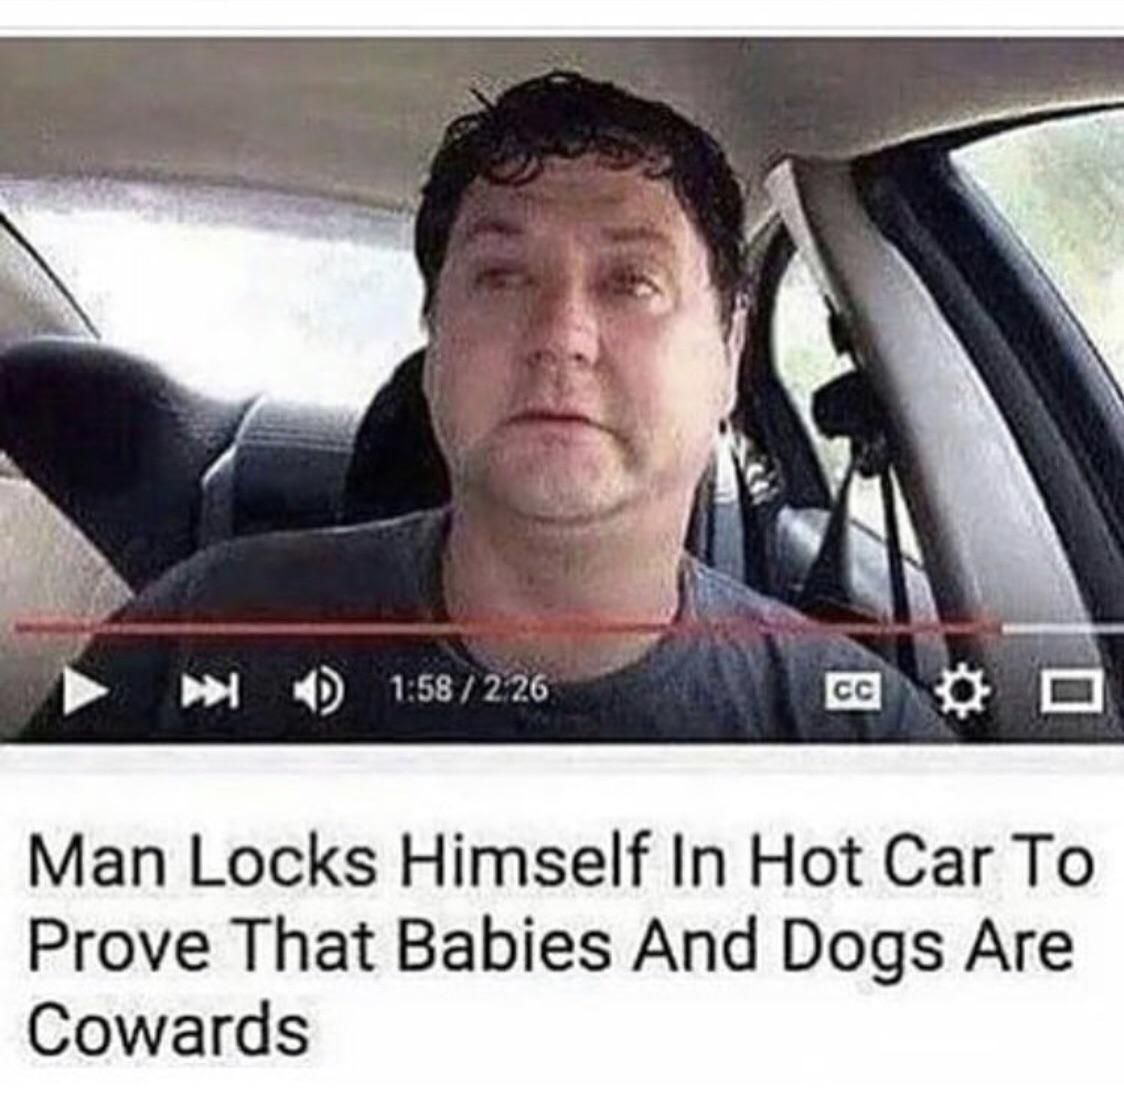 Babies & dogs = cowards